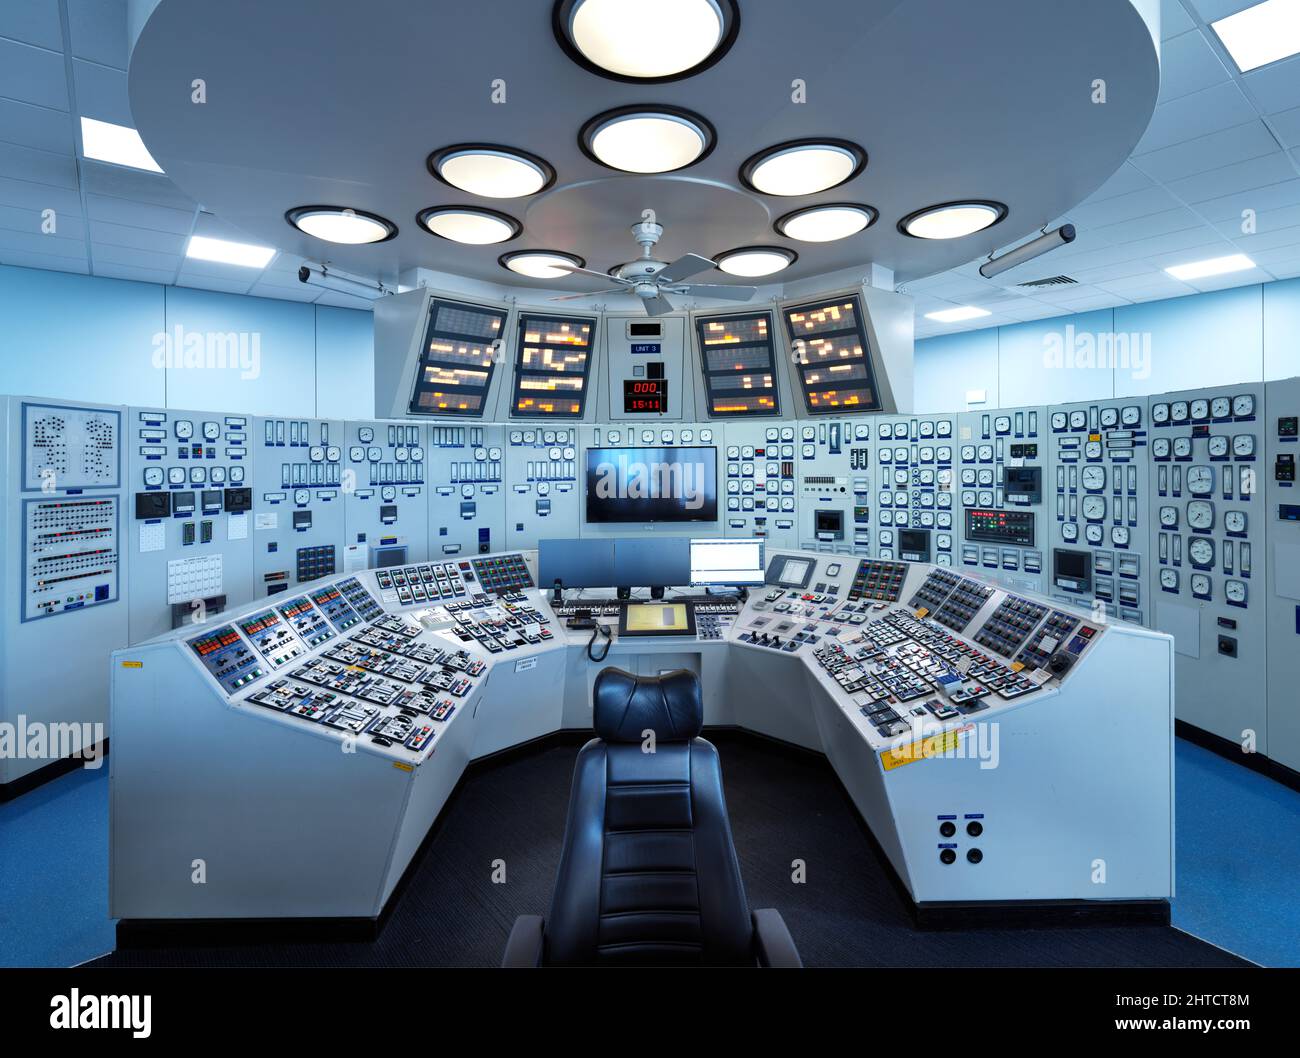 Cottam Power Station, Outgang Lane, Cottam, Treswell, Bassetlaw, Nottinghamshire, 2018. Interior view of a control room in the power station, showing the unit control desk with lighting above and the controller's chair in the foreground. Stock Photo